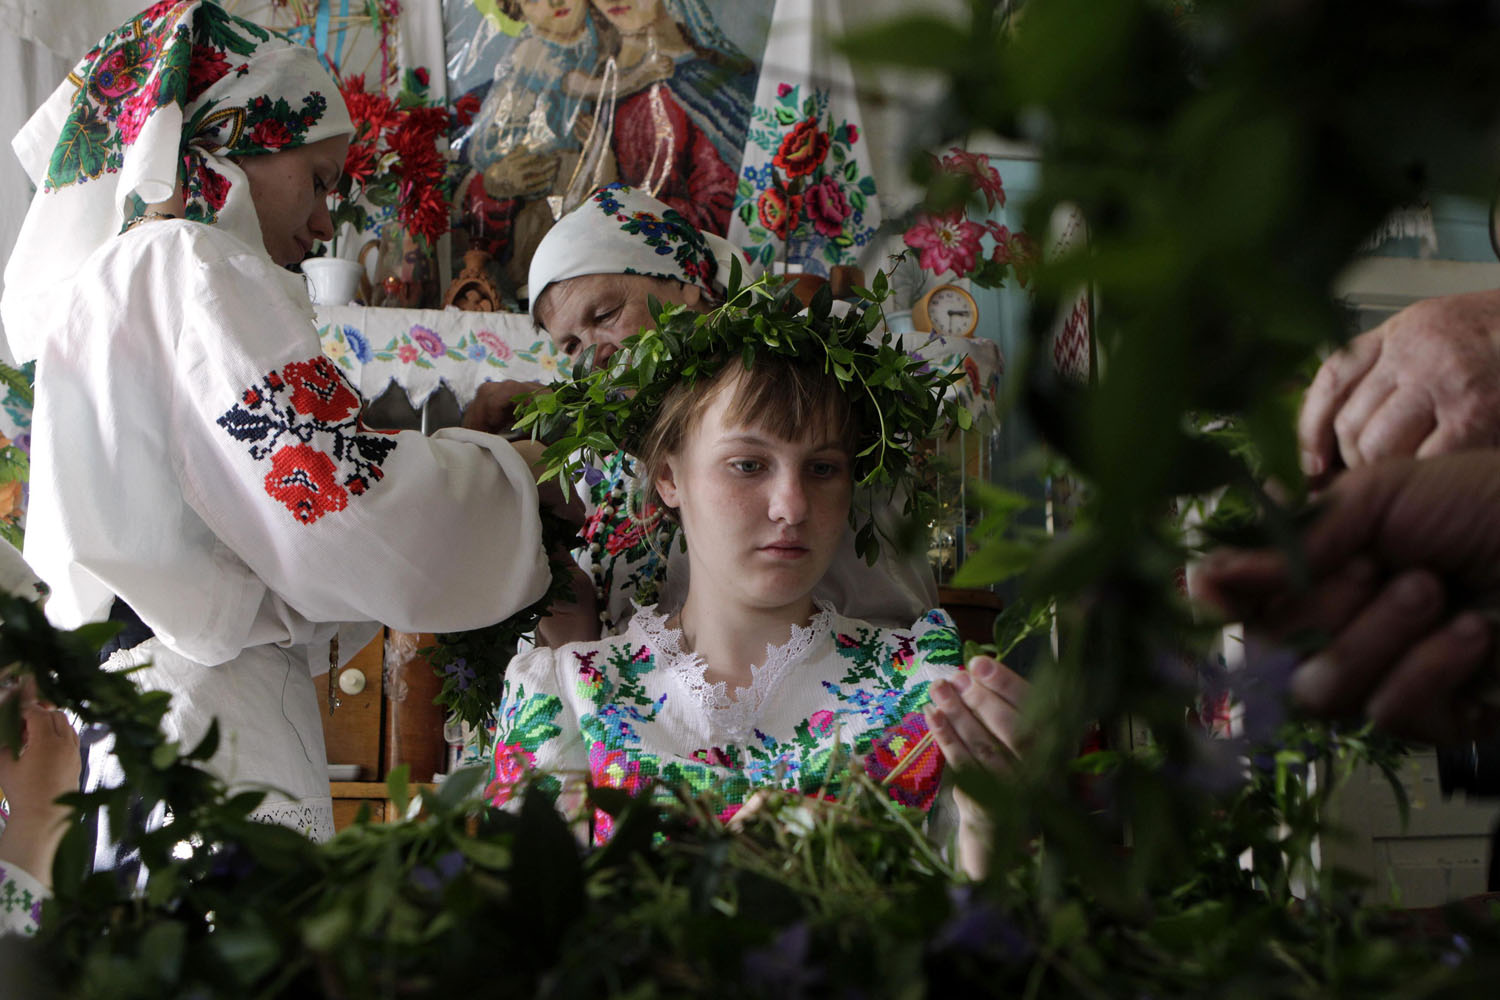 Women and girls in traditional dress make wreaths from periwinkle leaves to prepare for a ritual celebrating the pagan god Yurya in the village of Pogost